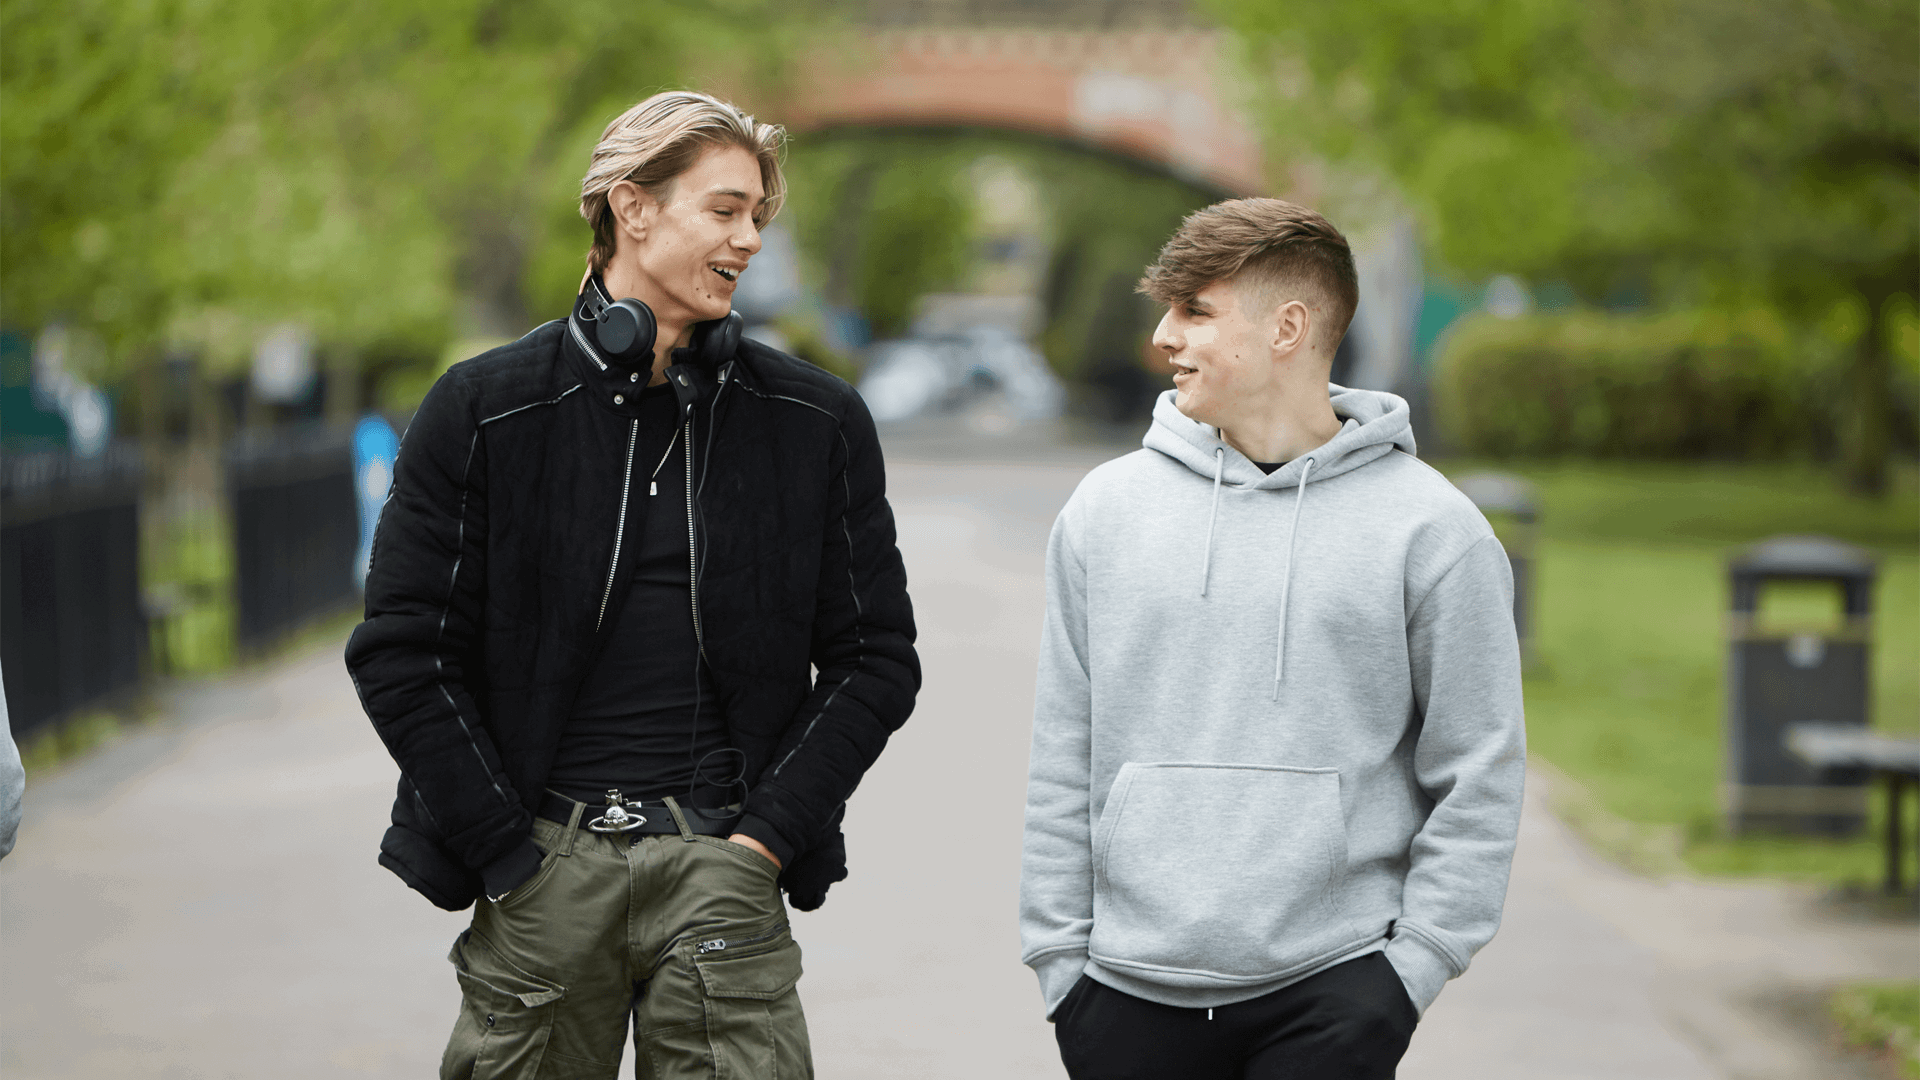 Two young men walking down a together, talking and smiling. One is wearing a black jacket and headphones around his neck. The other is wearing a grey hoodie.